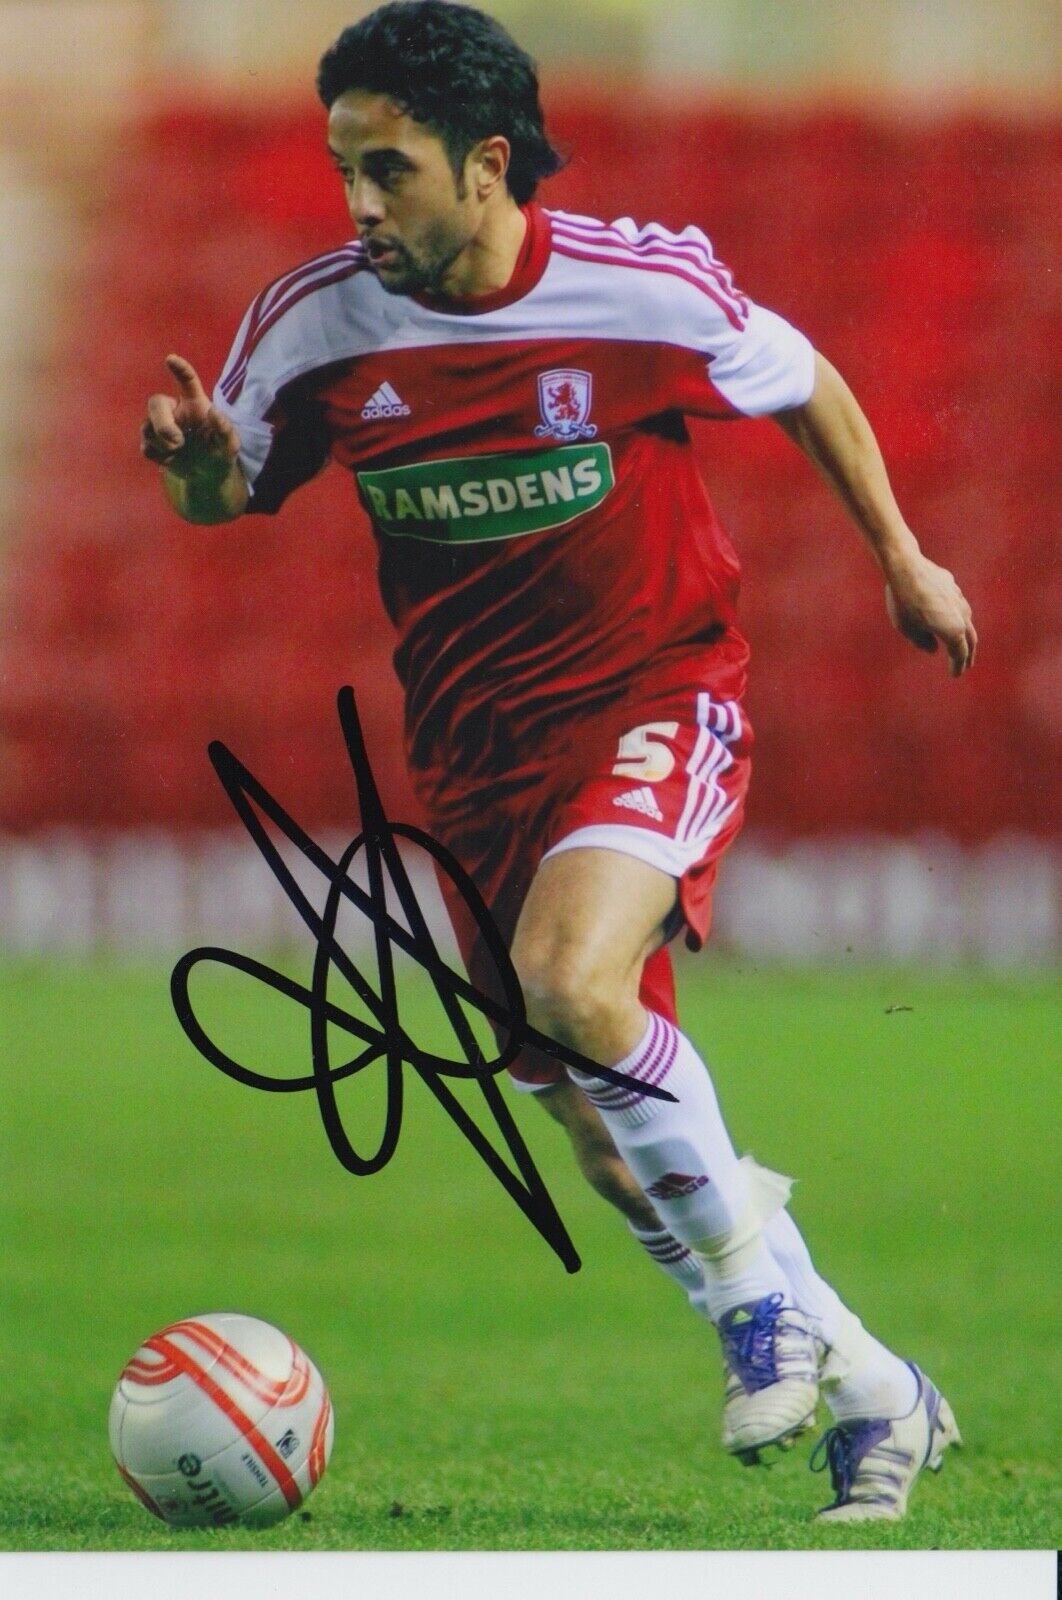 MEROUANE ZEMMAMA HAND SIGNED 6X4 Photo Poster painting - FOOTBALL AUTOGRAPH - MIDDLESBROUGH.